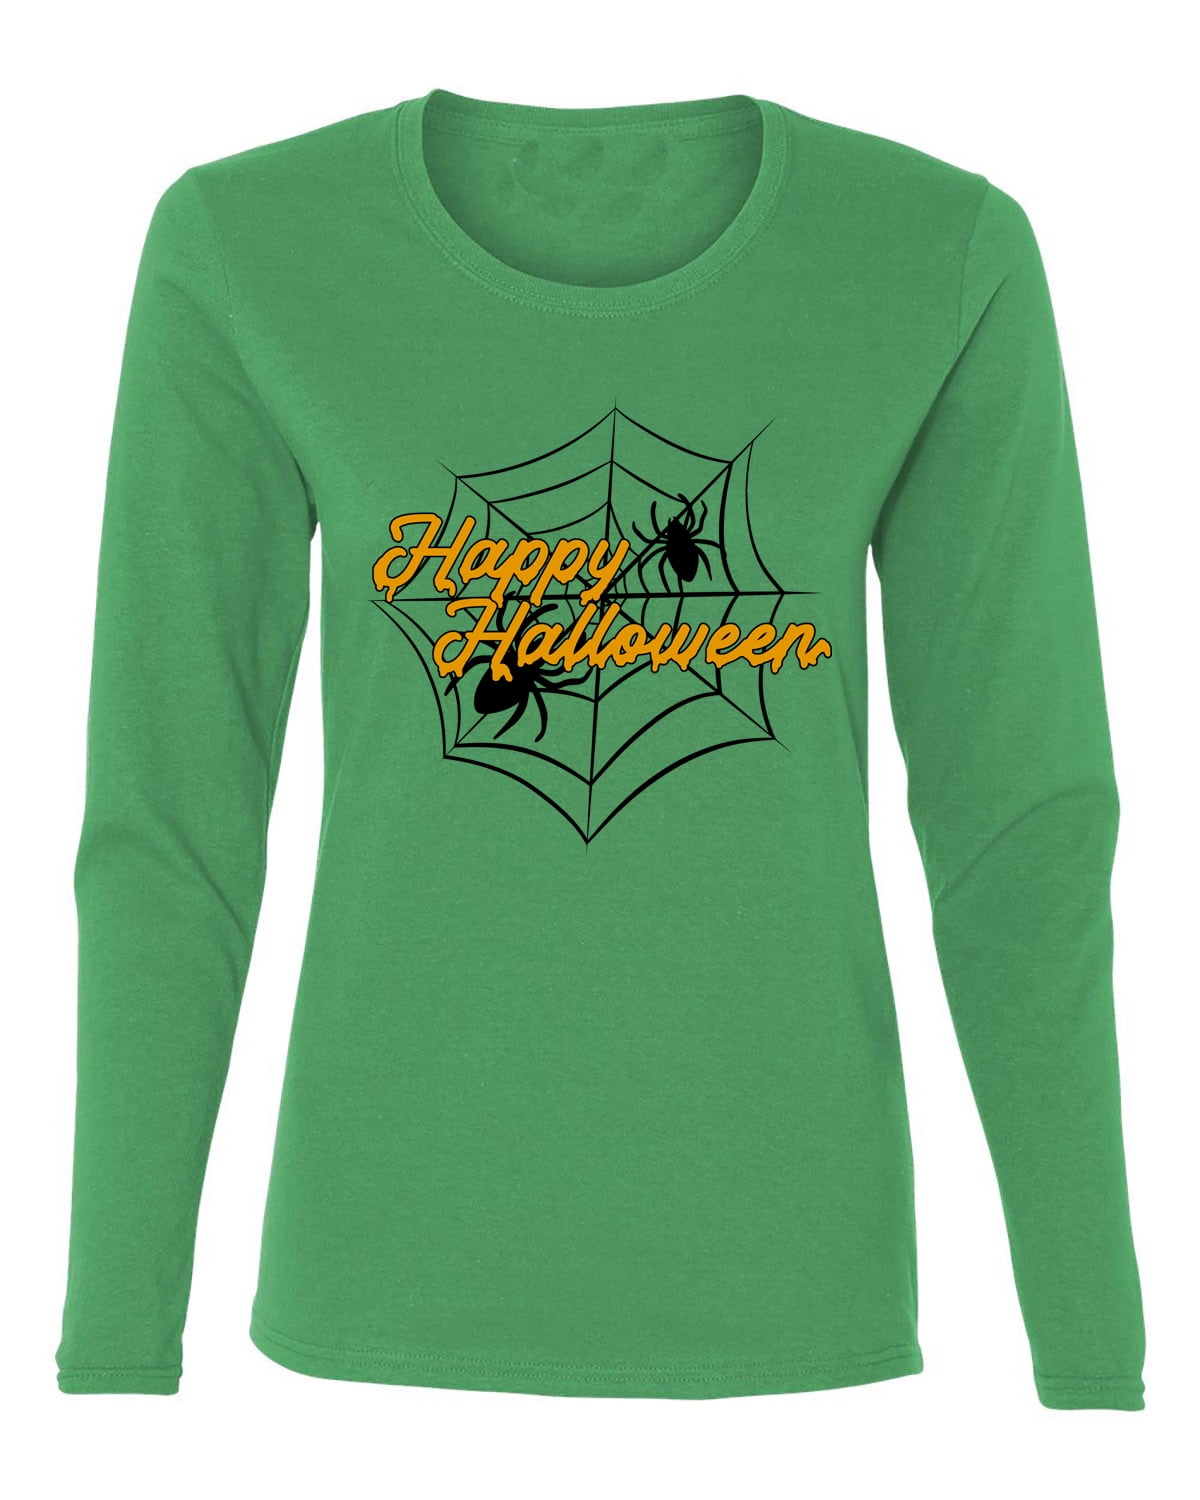 Women Happy Halloween T-Shirt Cute Spider Web Graphic Tee Top Fall Casual Loose Short Sleeve Tops